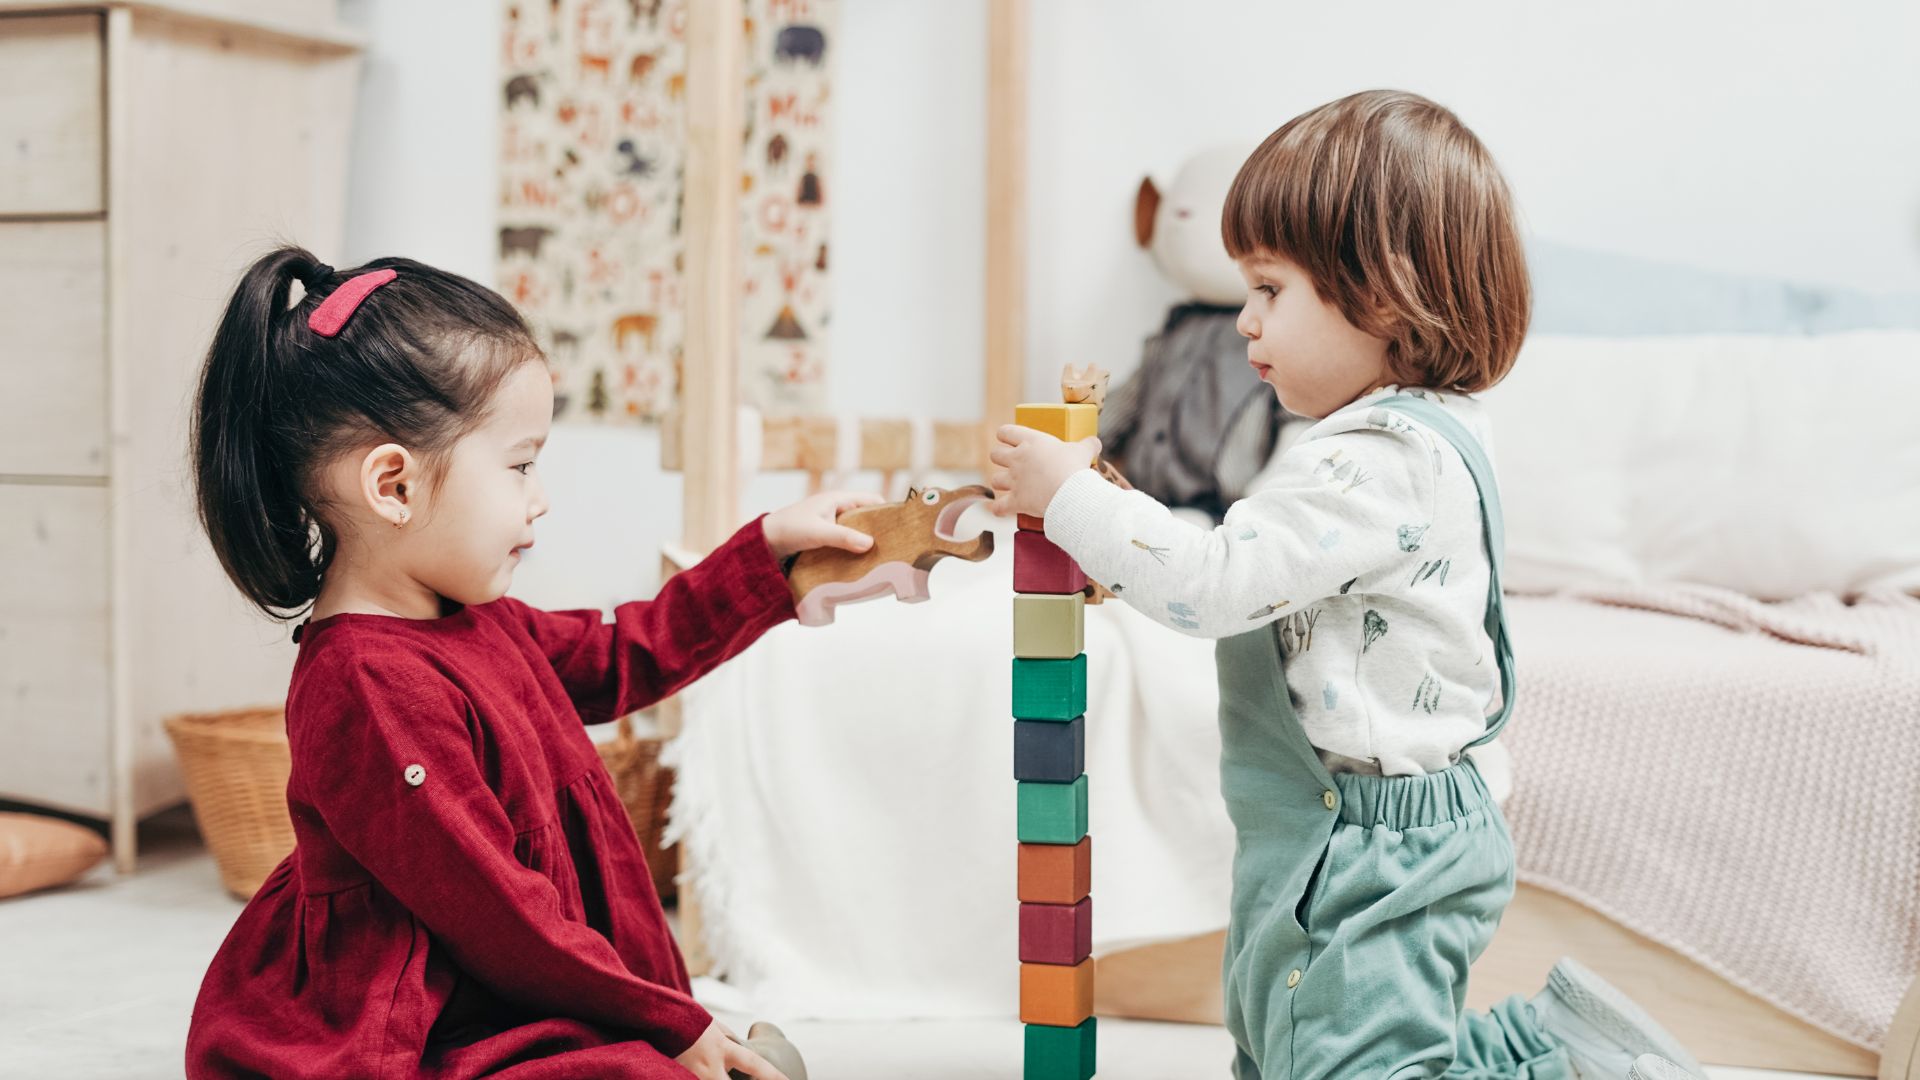 Sharing is Caring: How to teach children about sharing and empathy